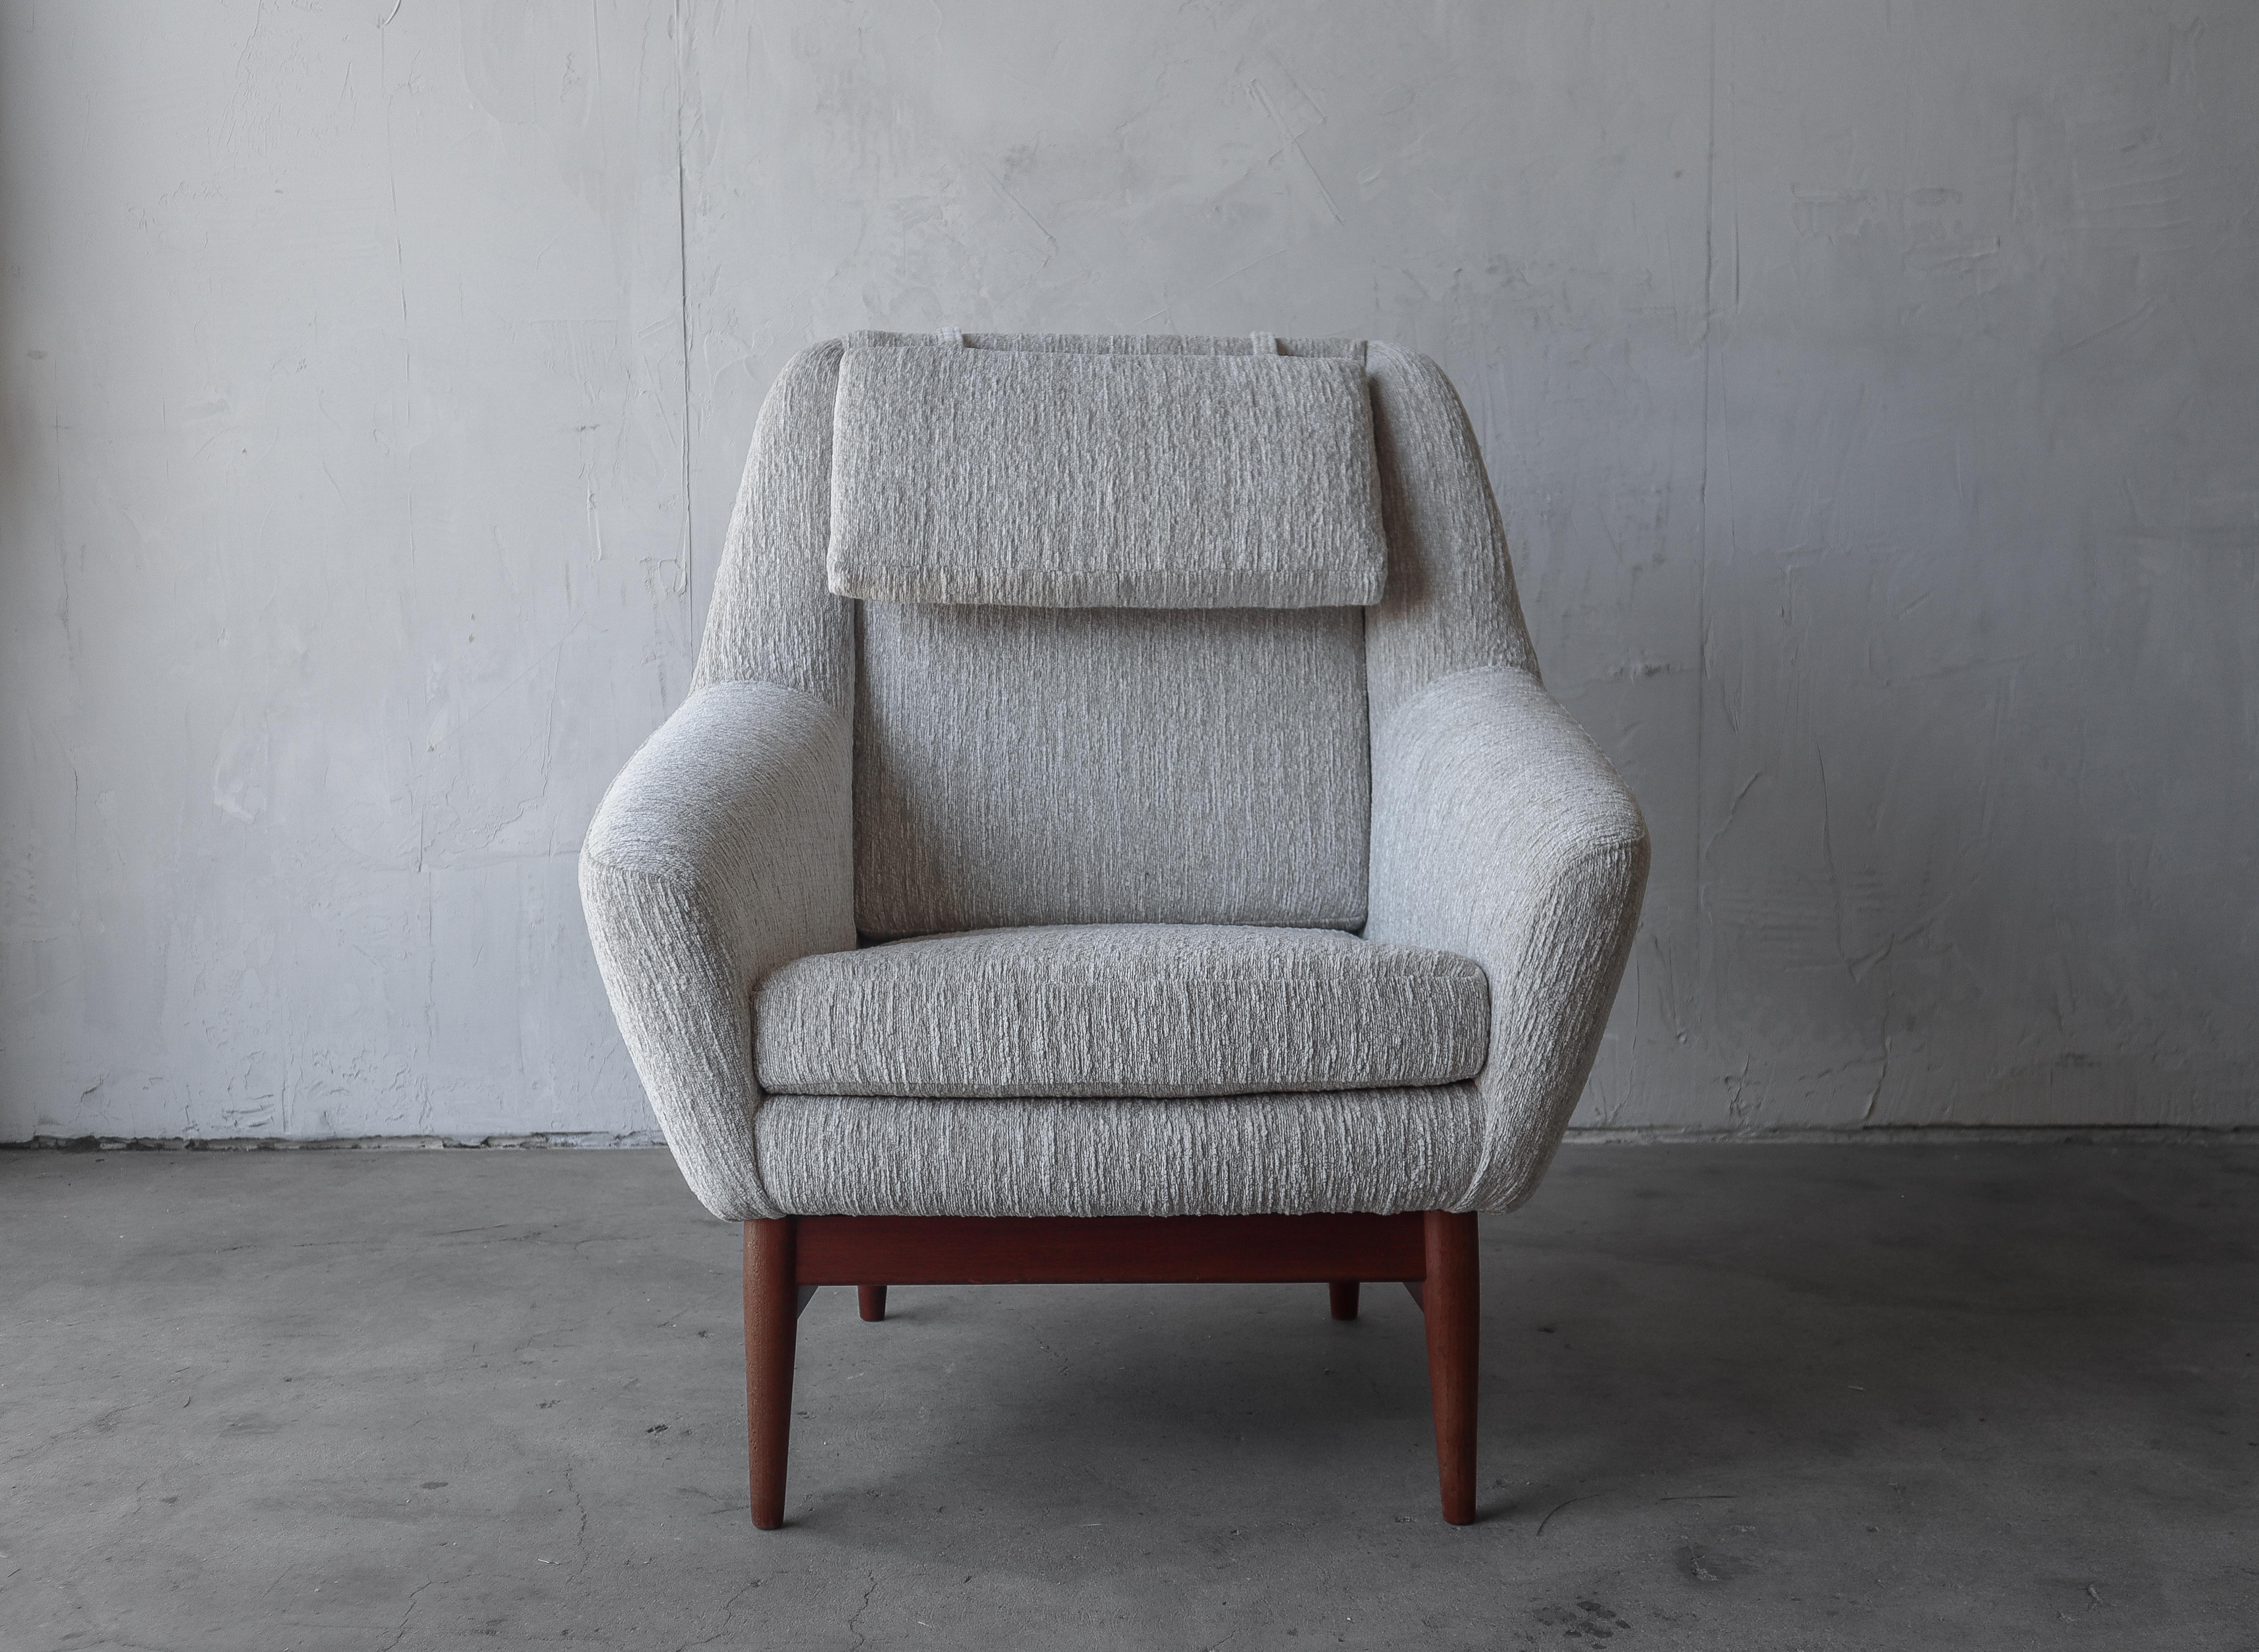 Authentic Mid-Century Danish Lounge Chair by IB-Kofod Larsen.  Large enough and stylish enough to stand alone, this gorgeous chair is the perfect one off chair for any room.  Designed with classic danish craftsmanship, there's not a line that